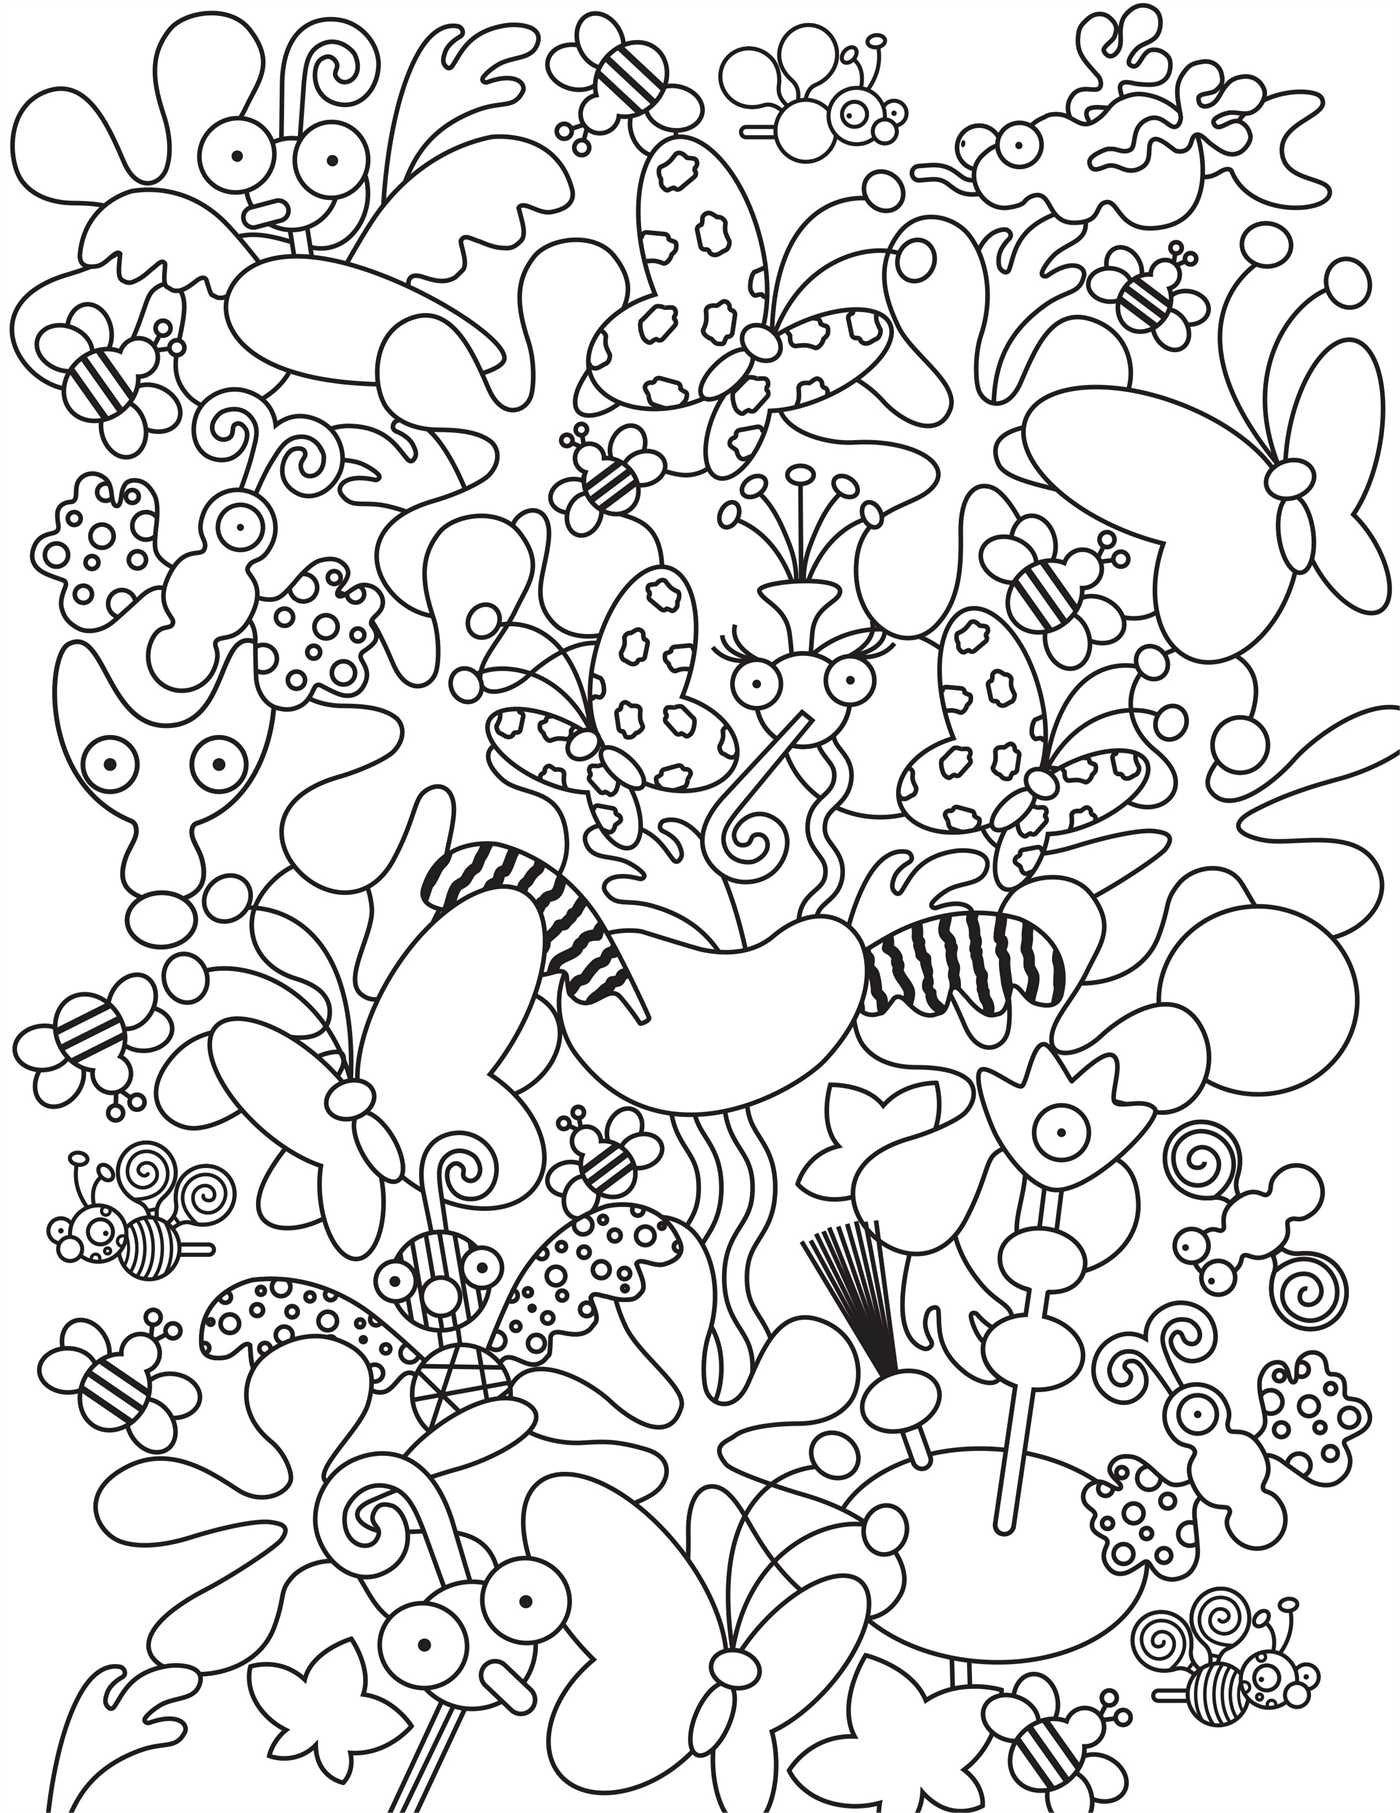 free-doodle-art-coloring-pages